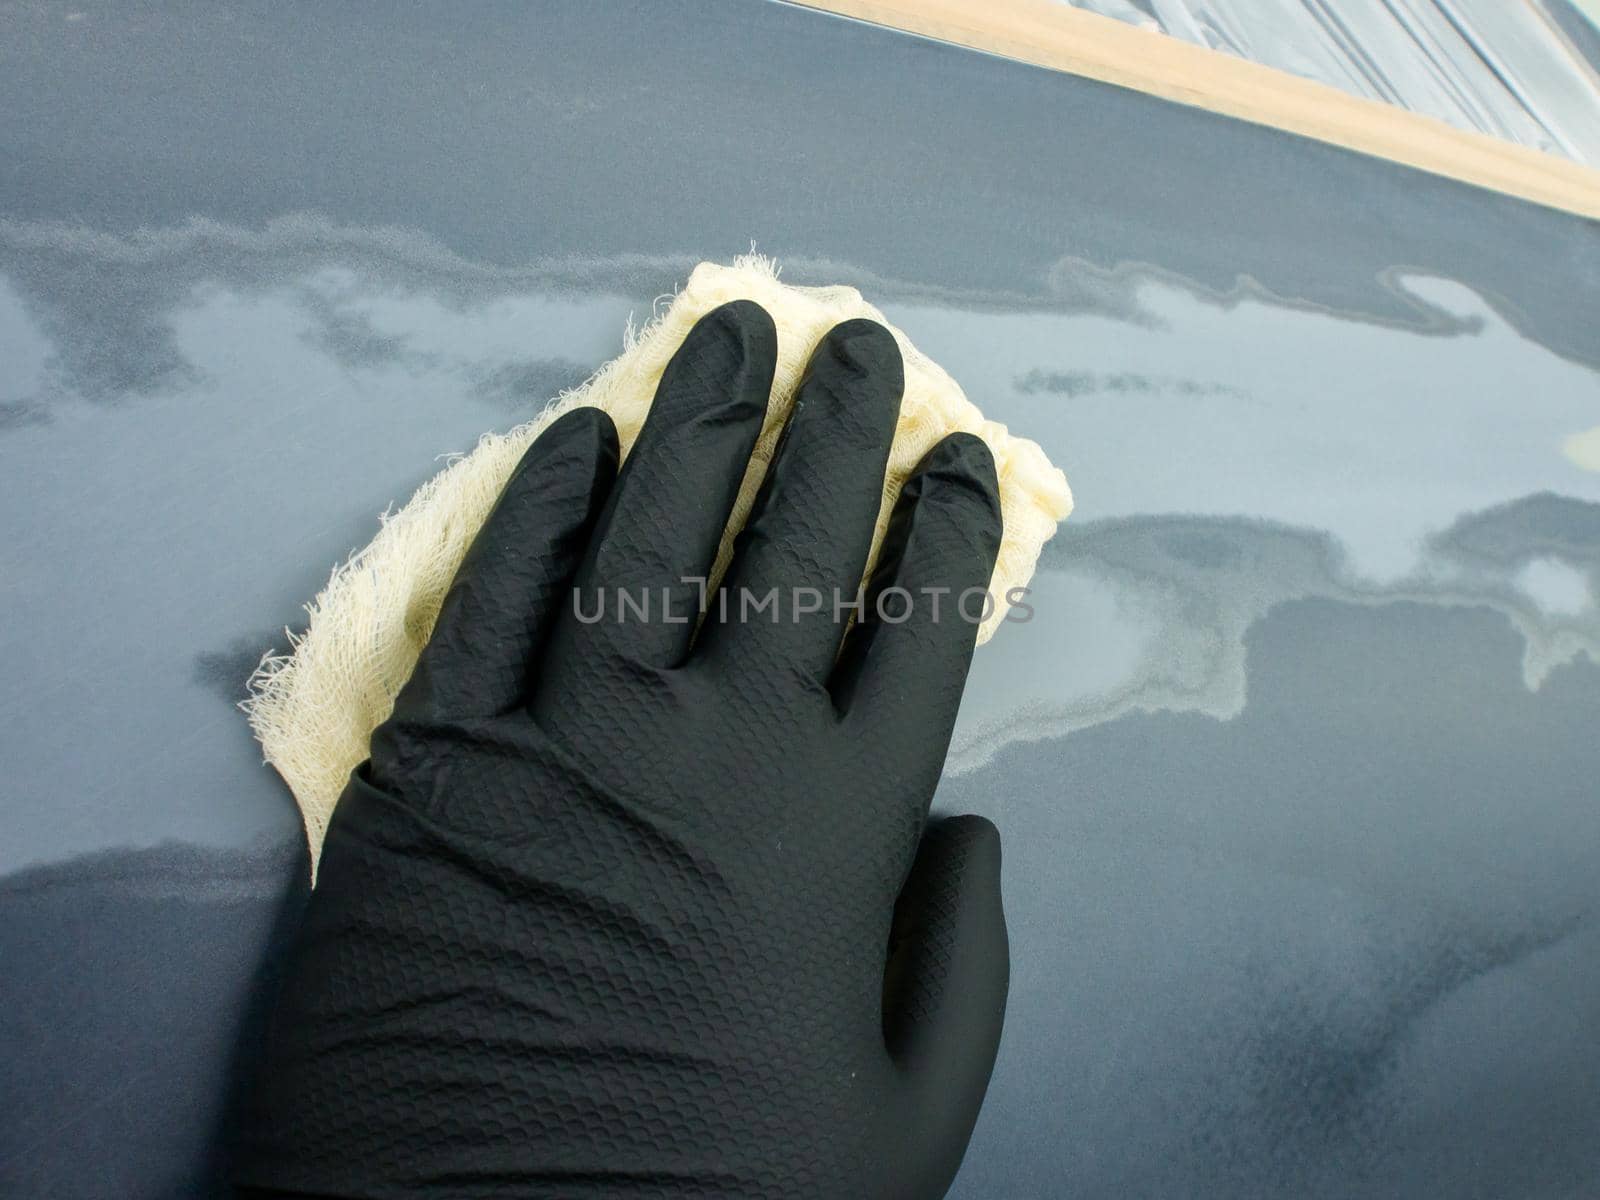 the hand of the auto painter in a black glove holds a special napkin for dusting the surface of the car. by igor707